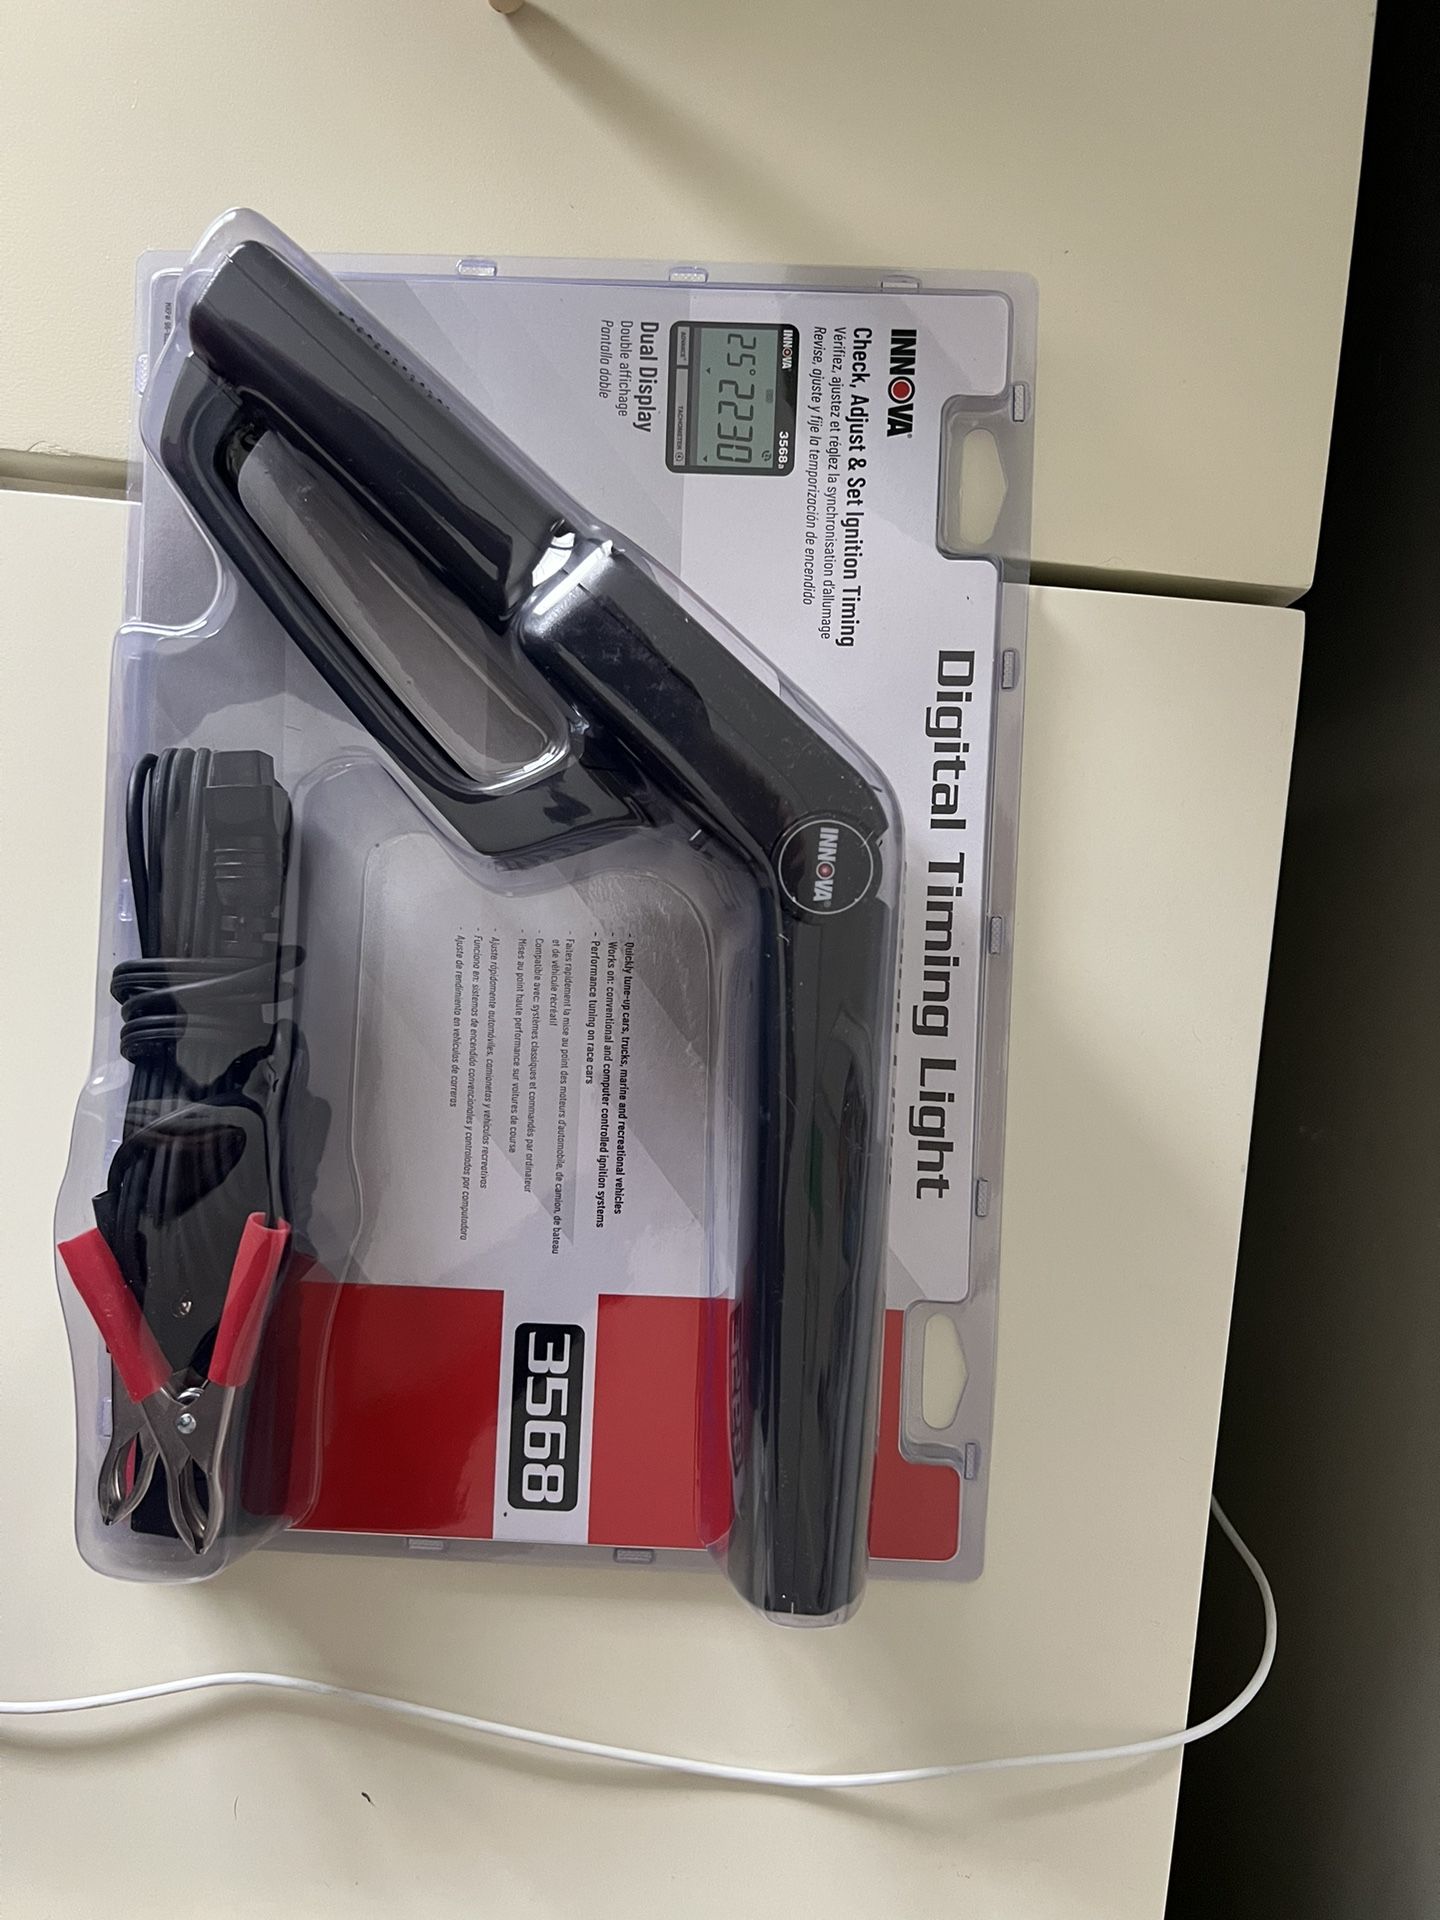 3568 Digital Timing Light for in San Clemente, CA - OfferUp